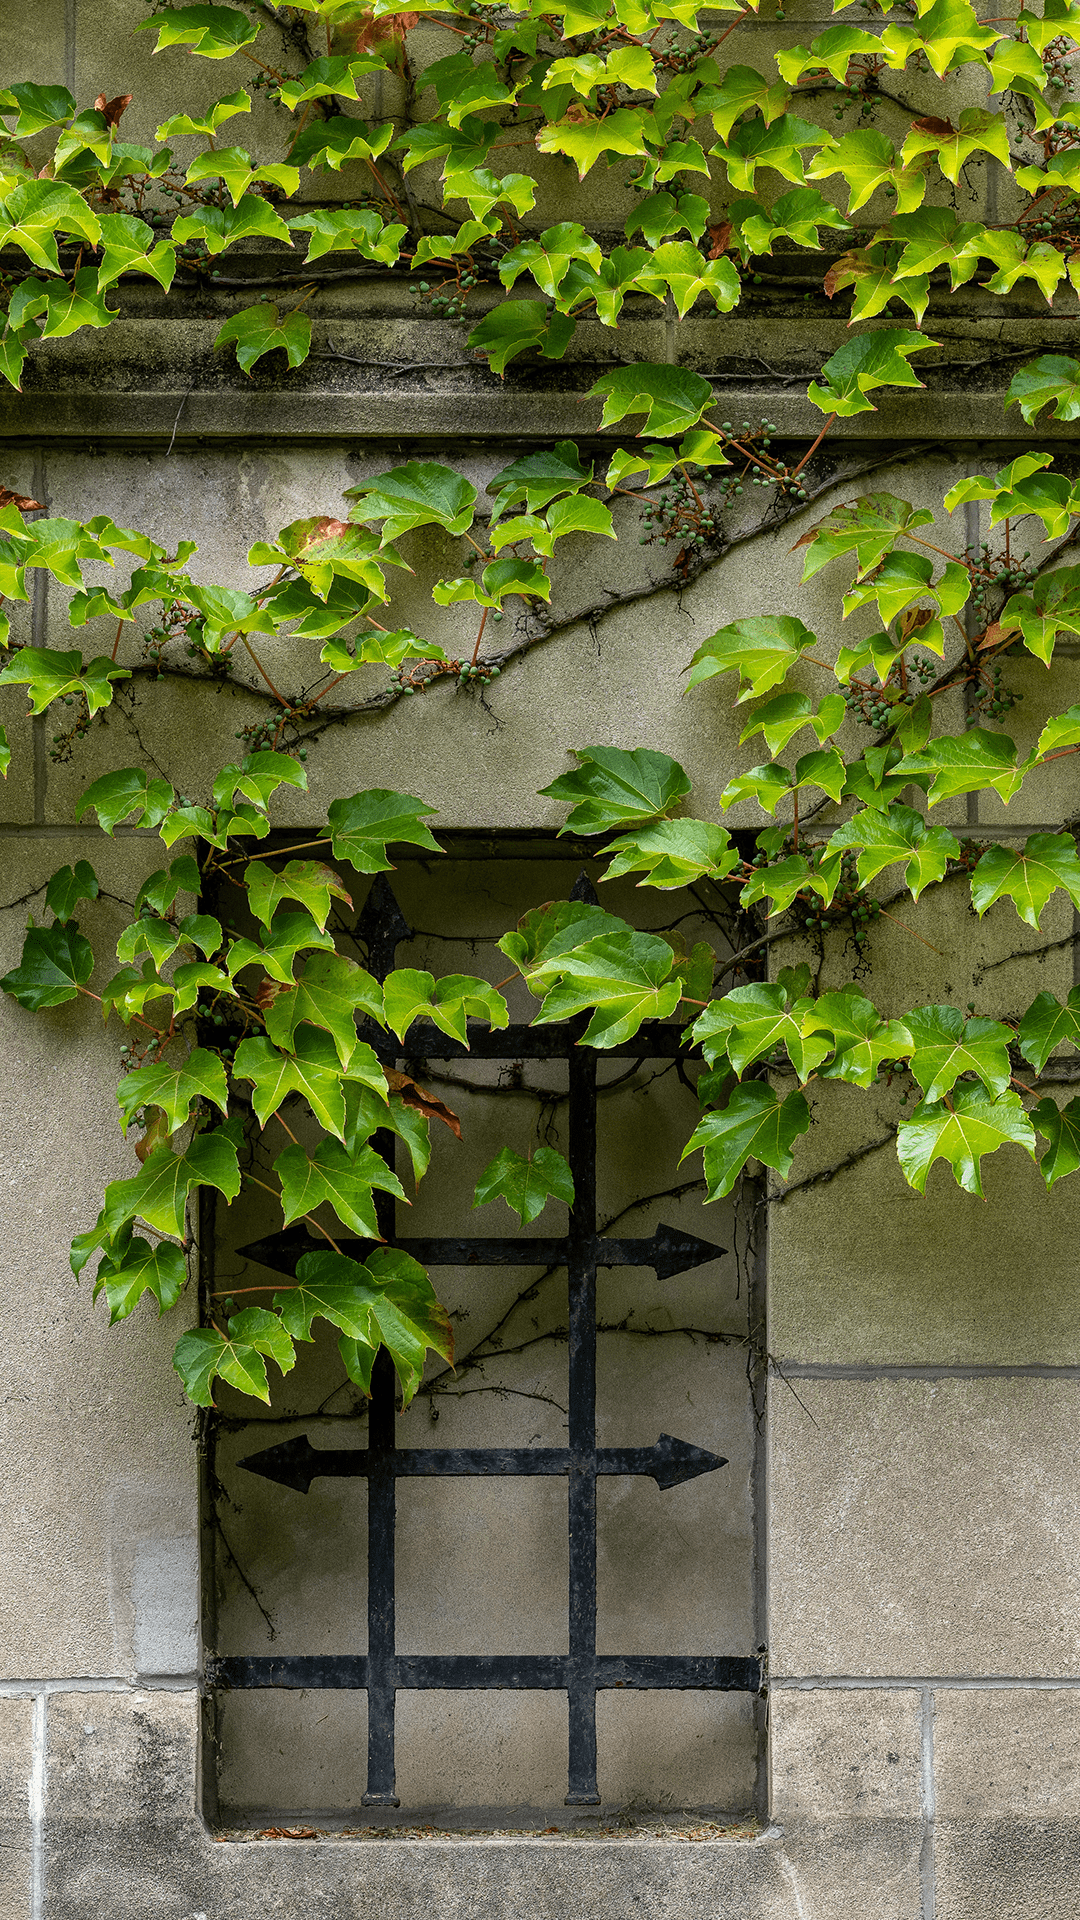 Stone building exterior with iron bars and green ivy vines